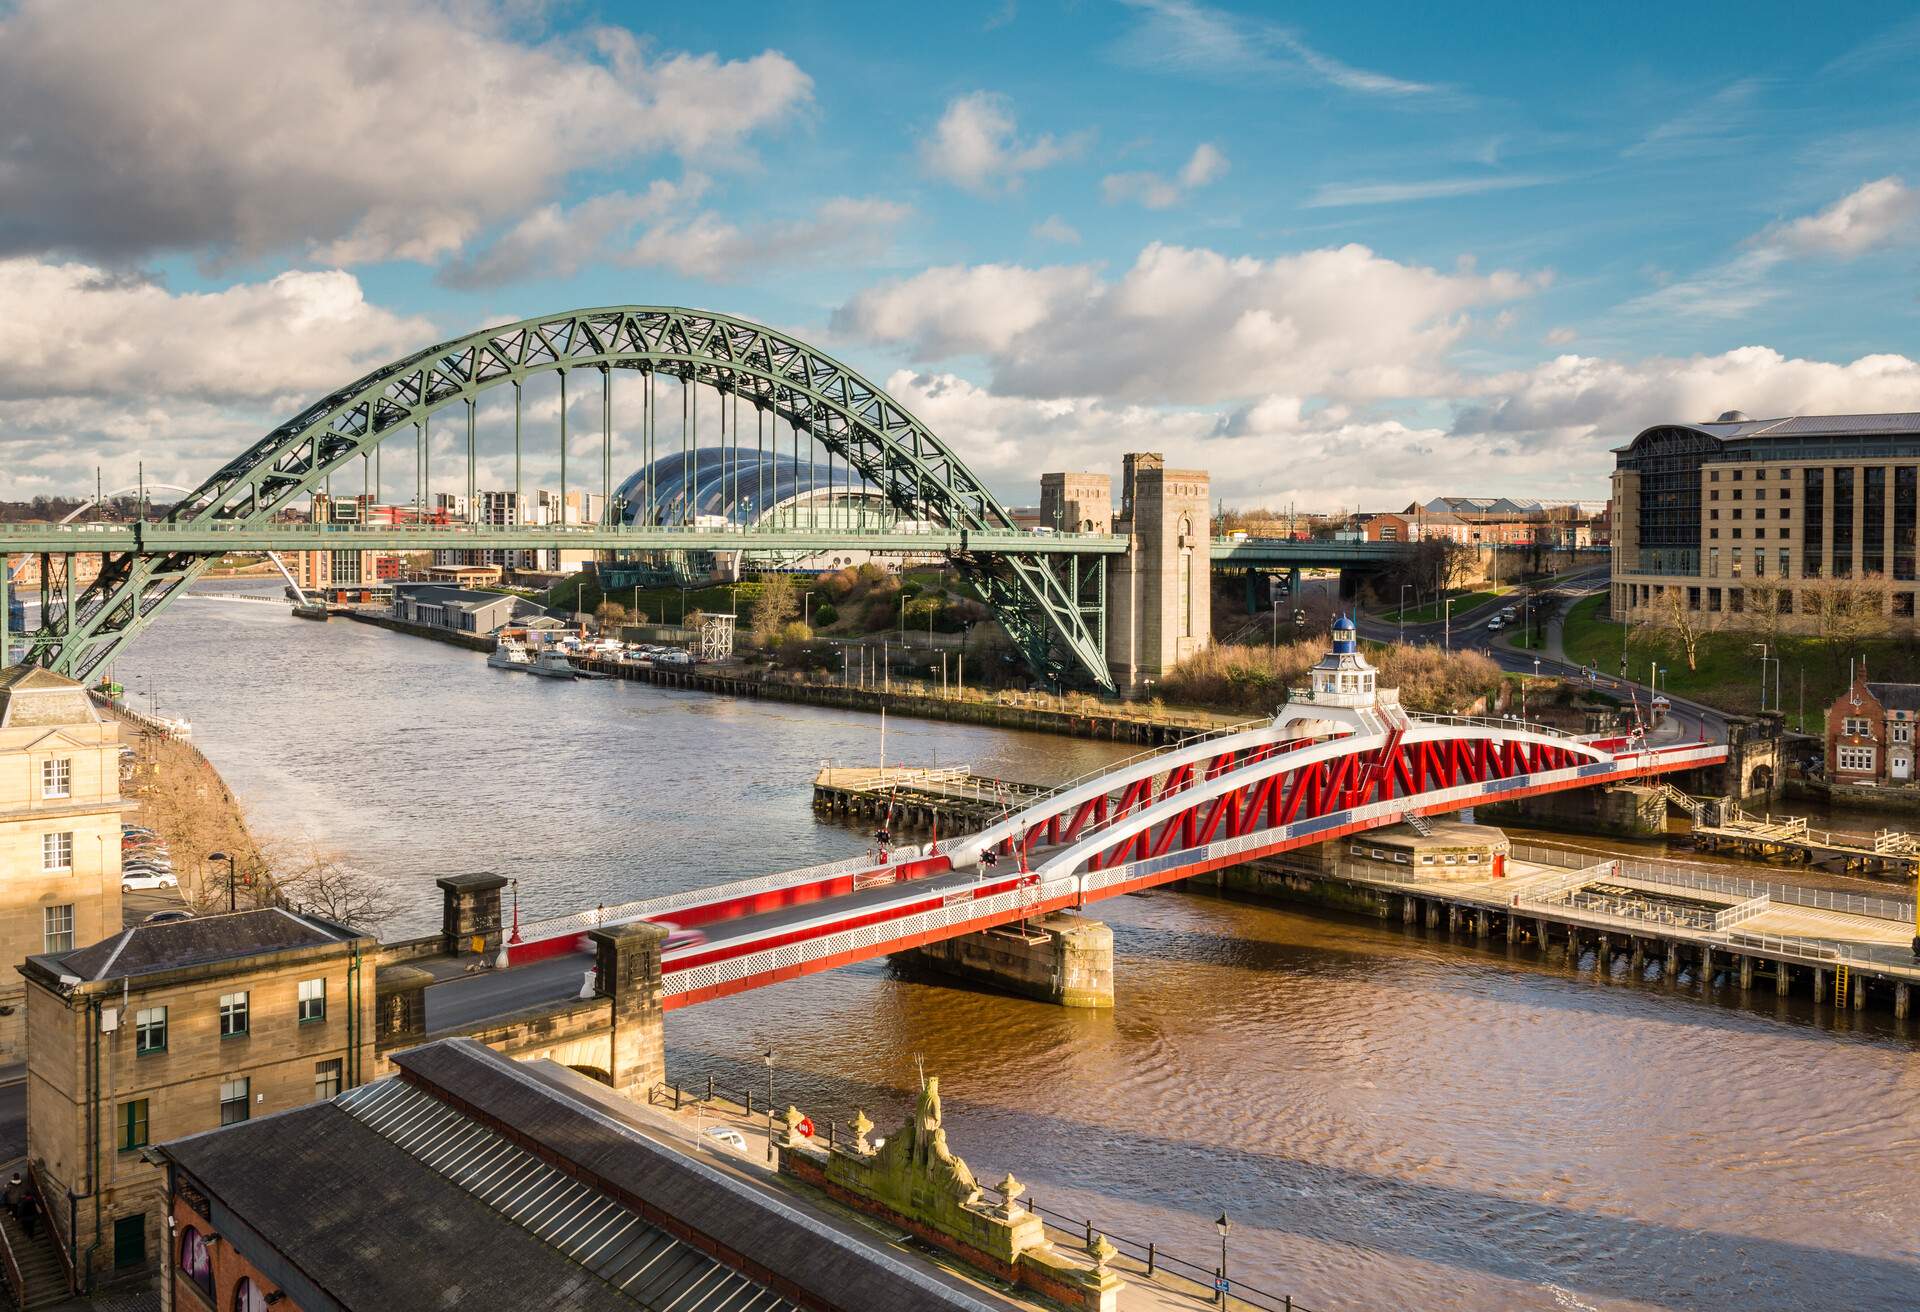 DEST-ENGLAND-NEWCASTLE UPON TYNE-GettyImages-510958054